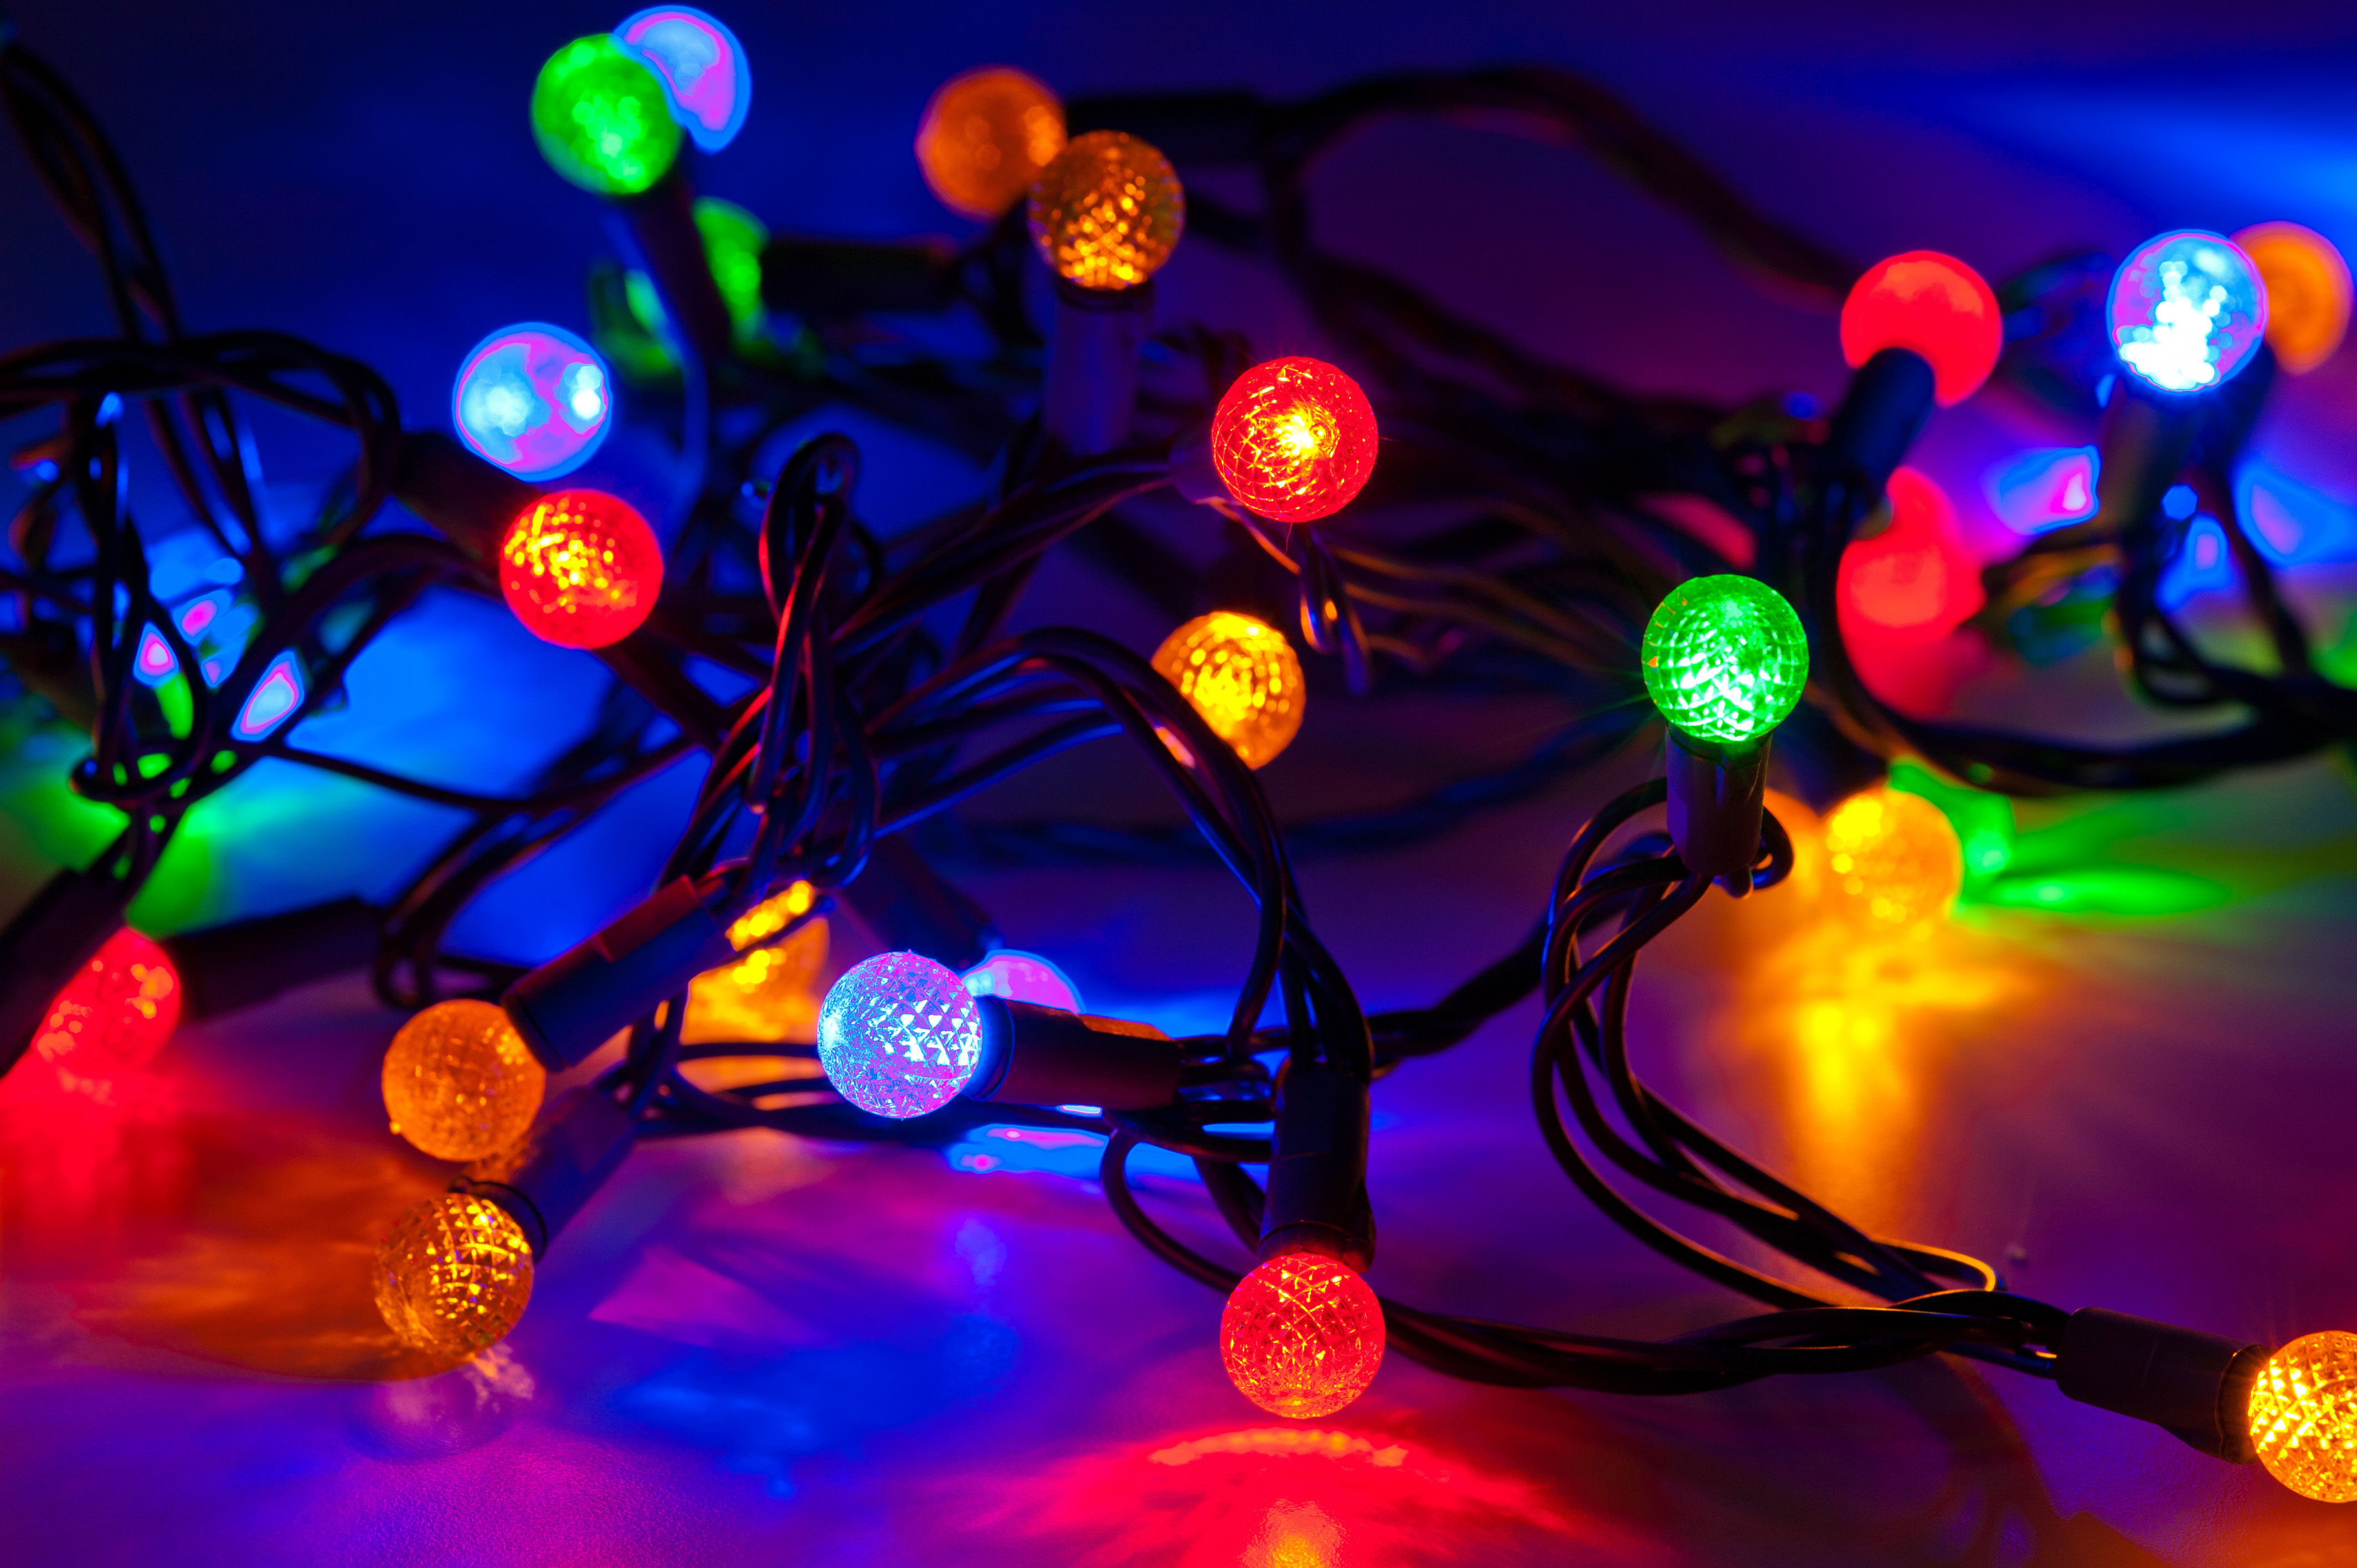 Canadian Tire is recalling some indoor and outdoor Christmas lights